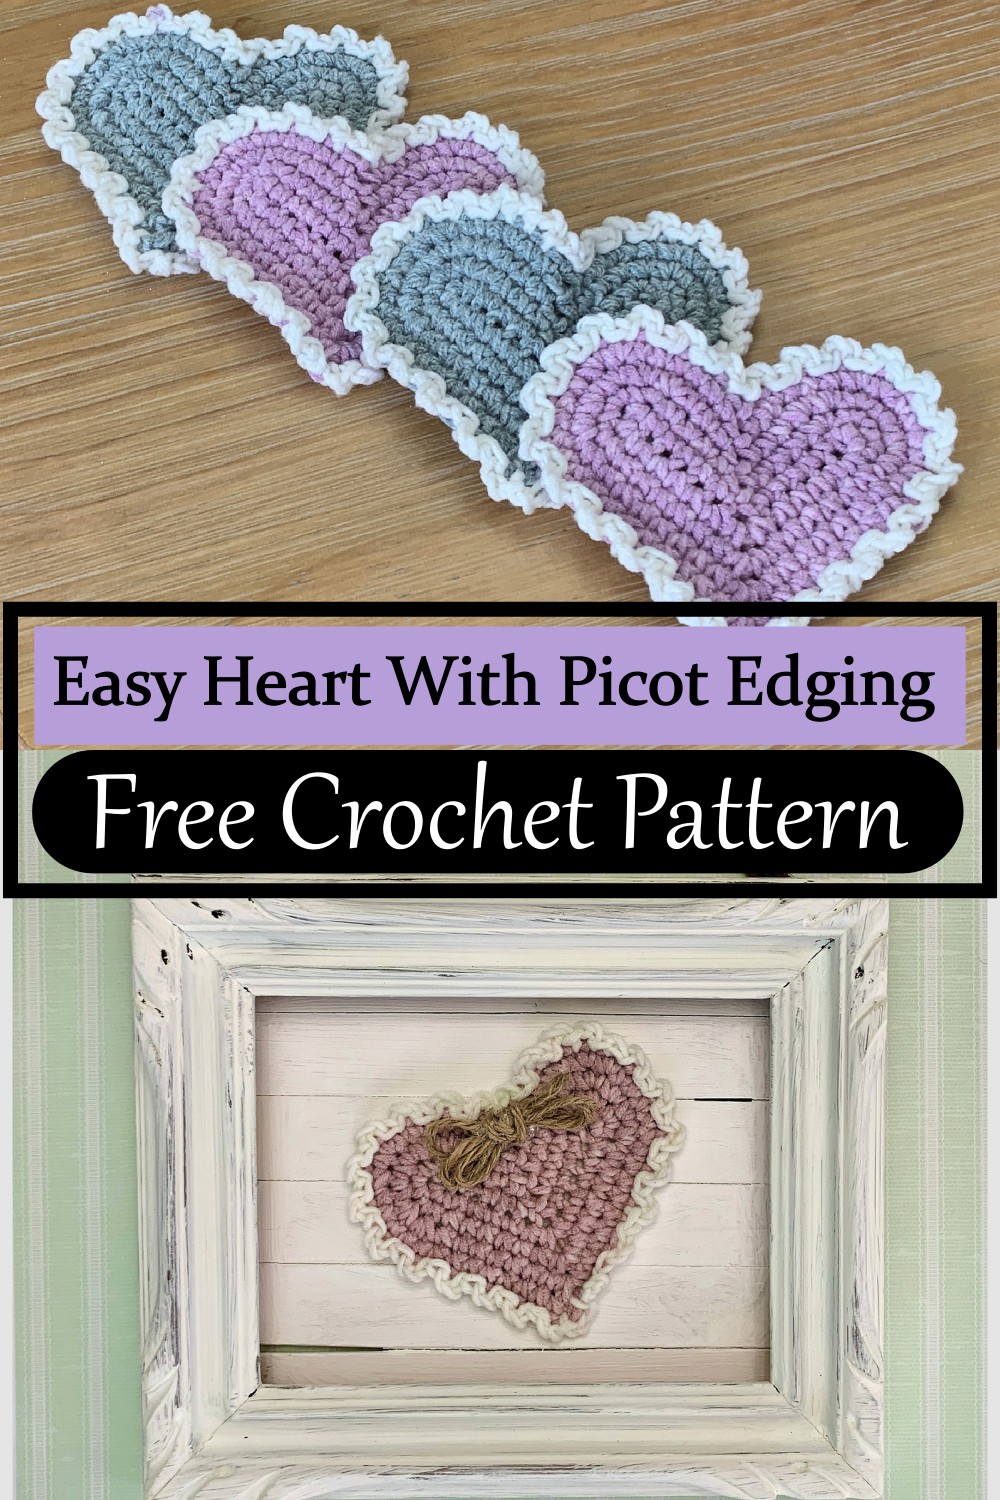 Easy Heart With Picot Edging